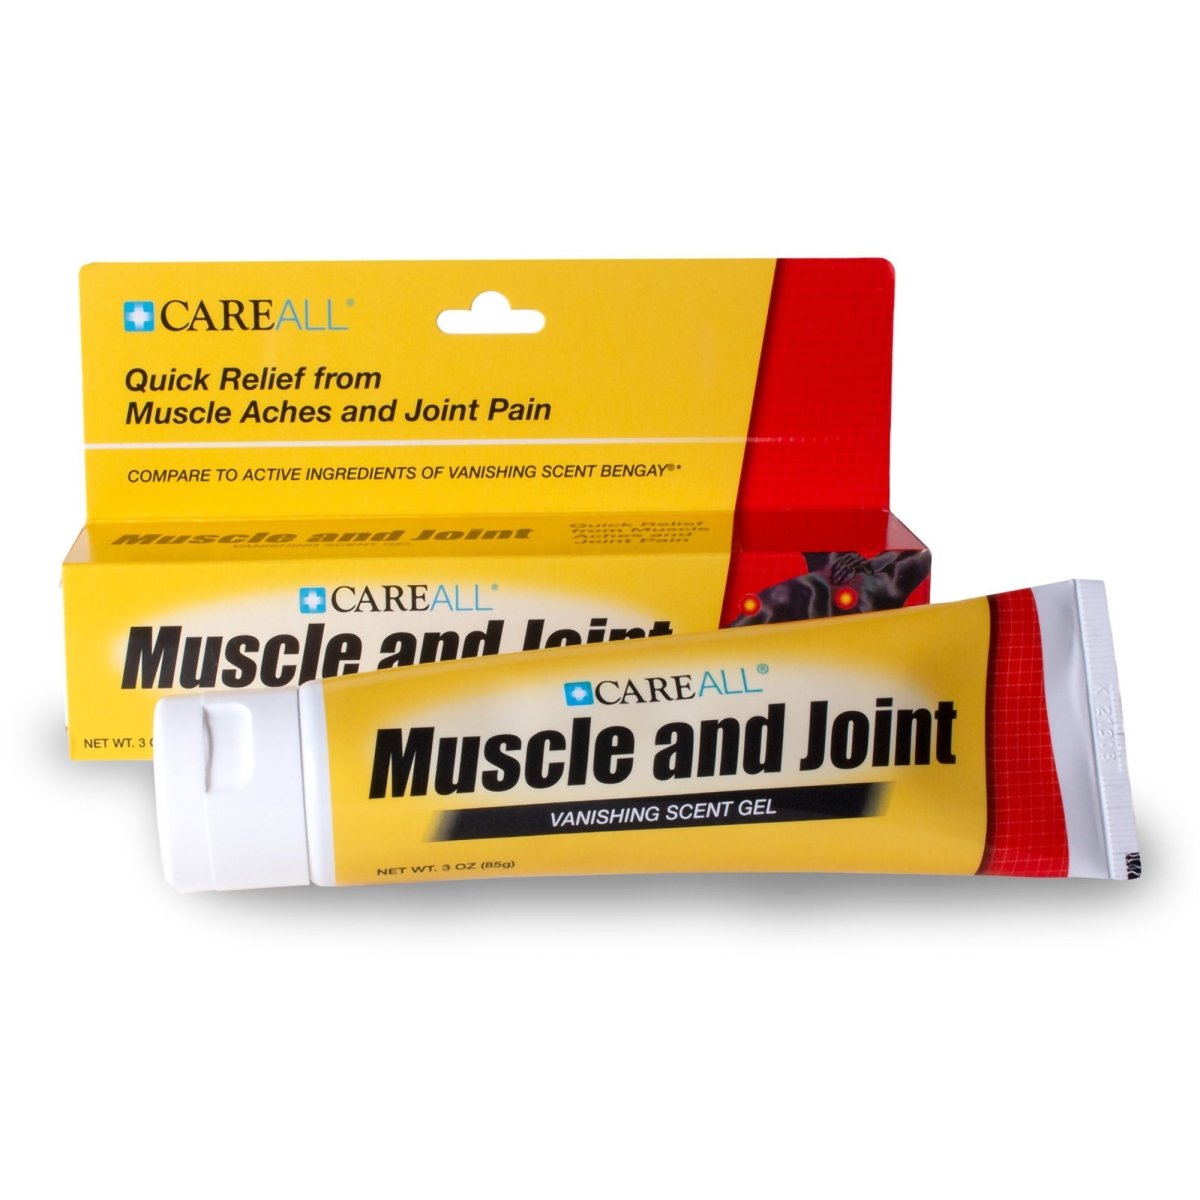 Careall Menthol Topical Pain Relief